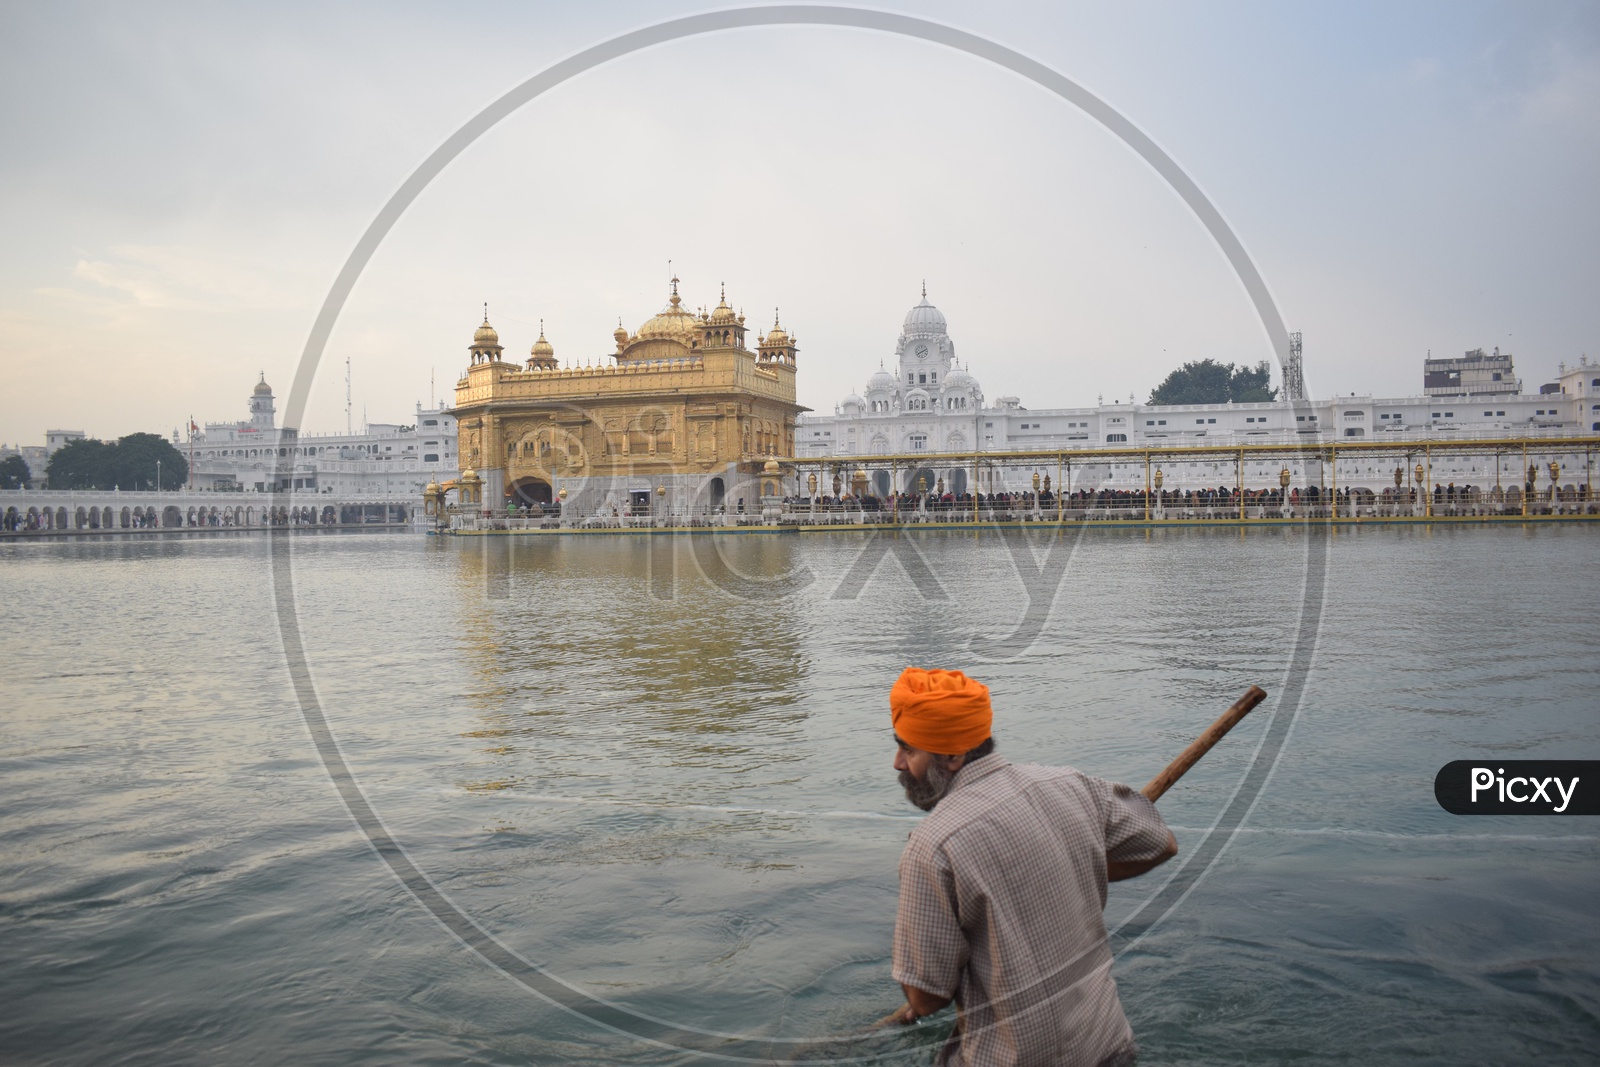 A volunteer cleaning the pond around the golden temple.